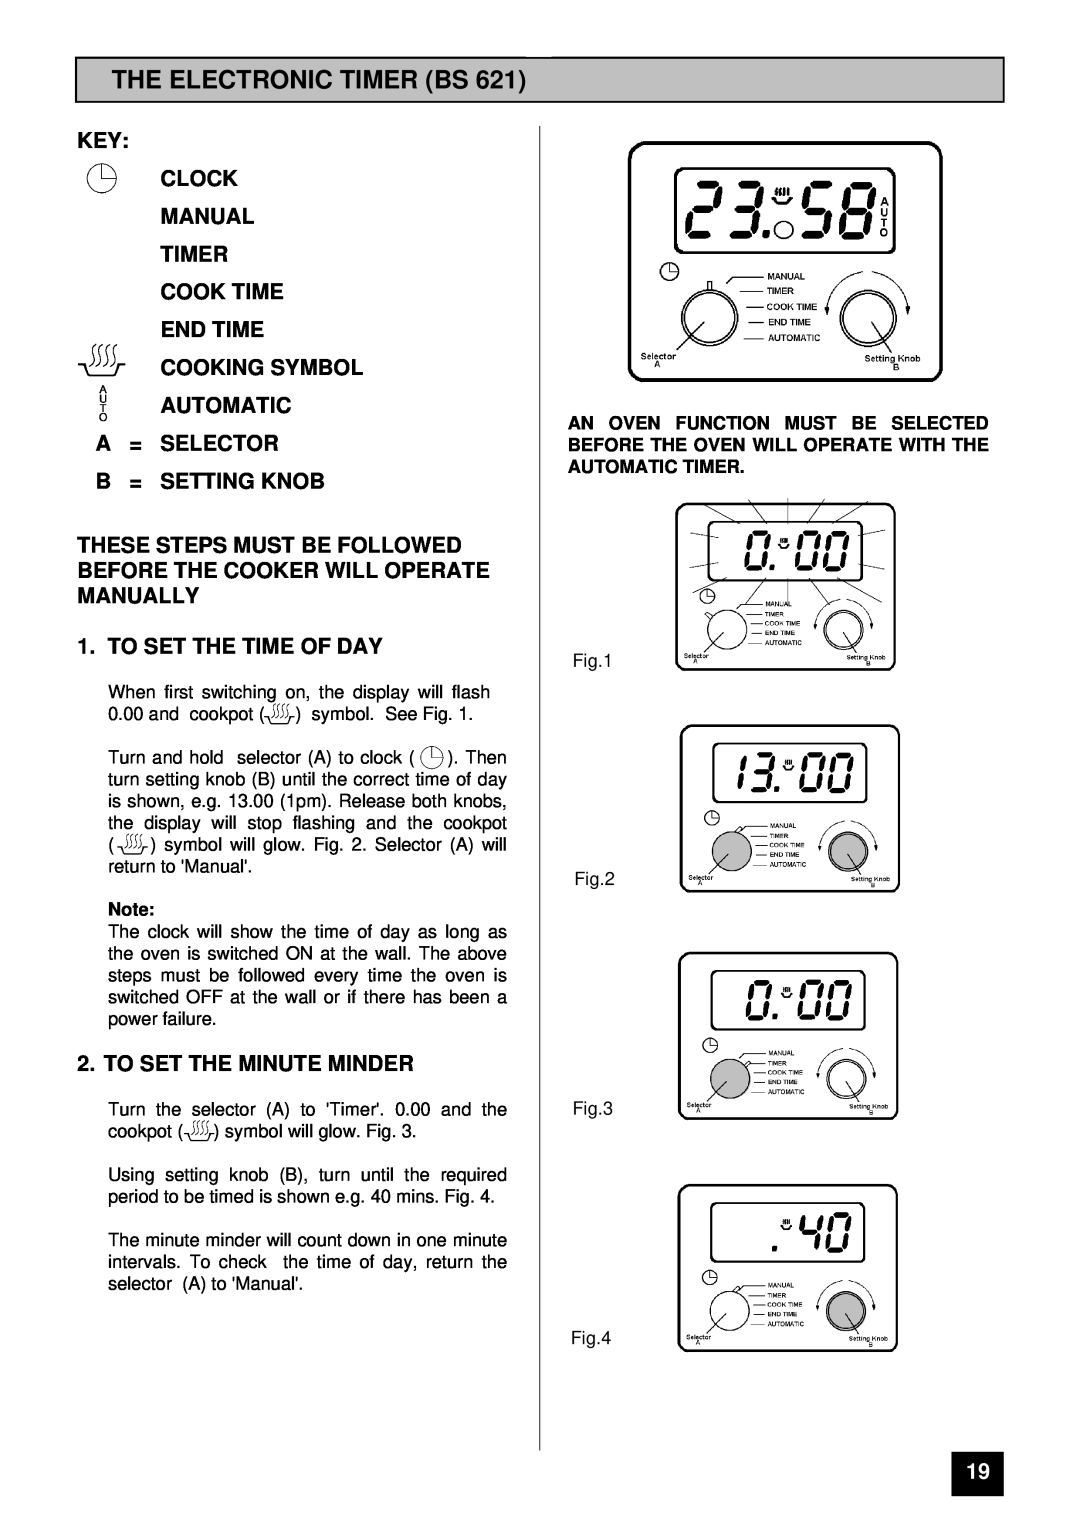 Tricity Bendix BS 611/BS 621 The Electronic Timer Bs, Key Clock Manual Timer Cook Time End Time Cooking Symbol Automatic 